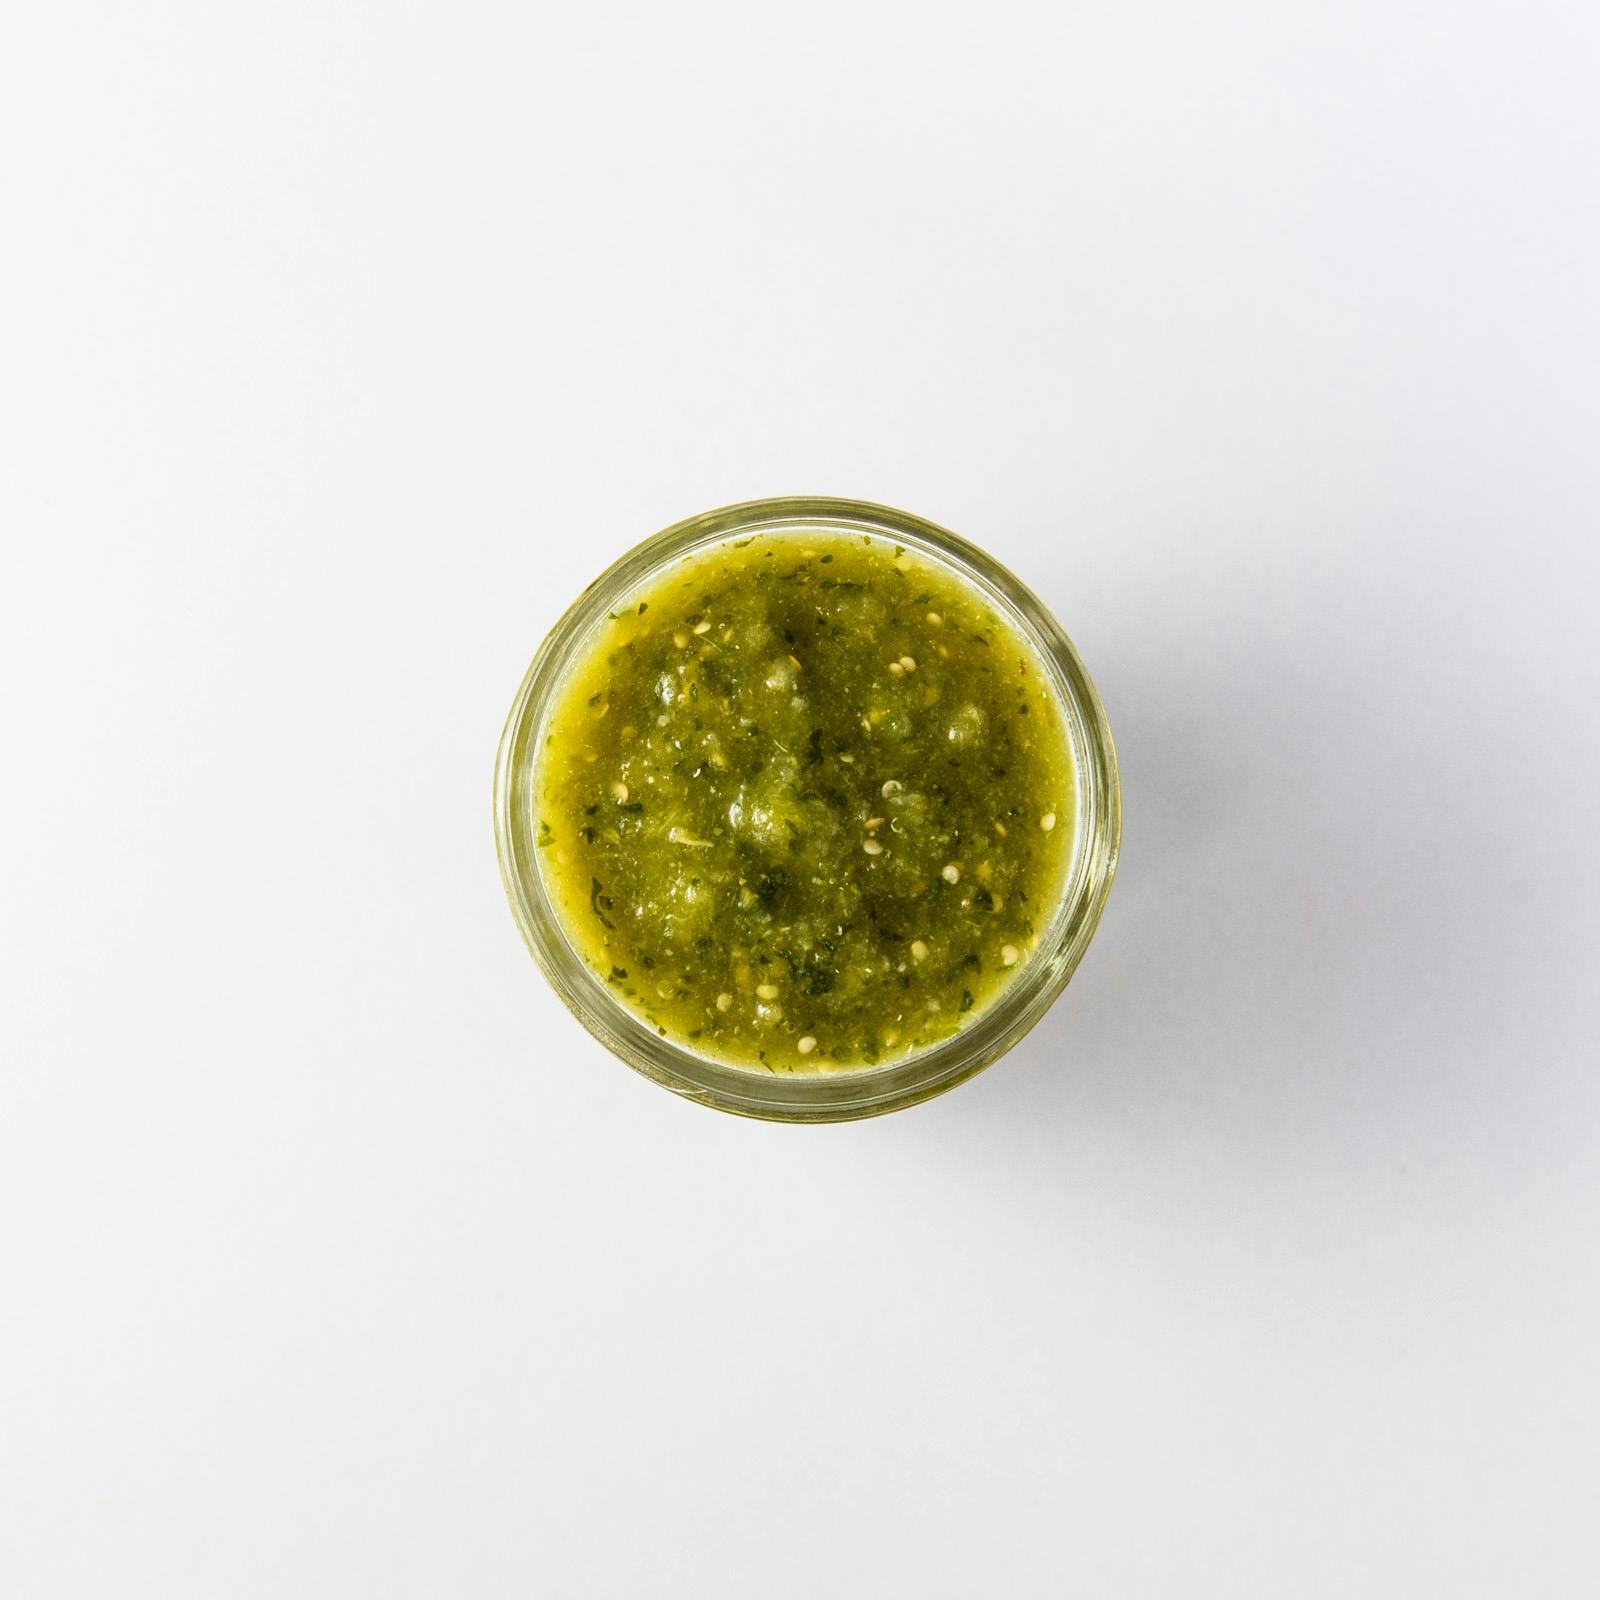 Tomatillo Salsa from Taco Royale - Eastside Madison in Madison, WI